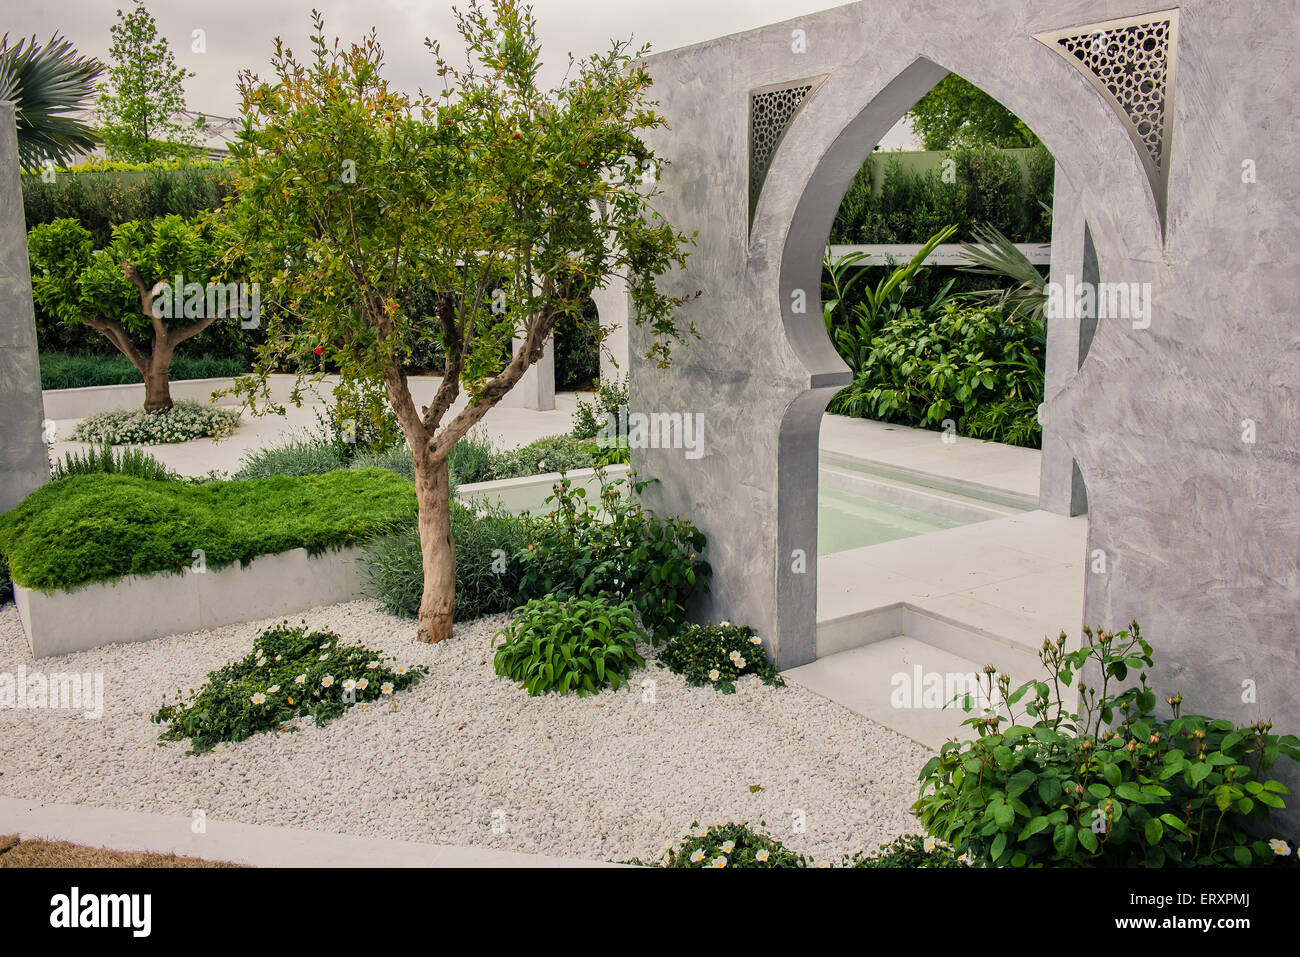 the beauty of islam garden at the chelsea flower show 2015 stock